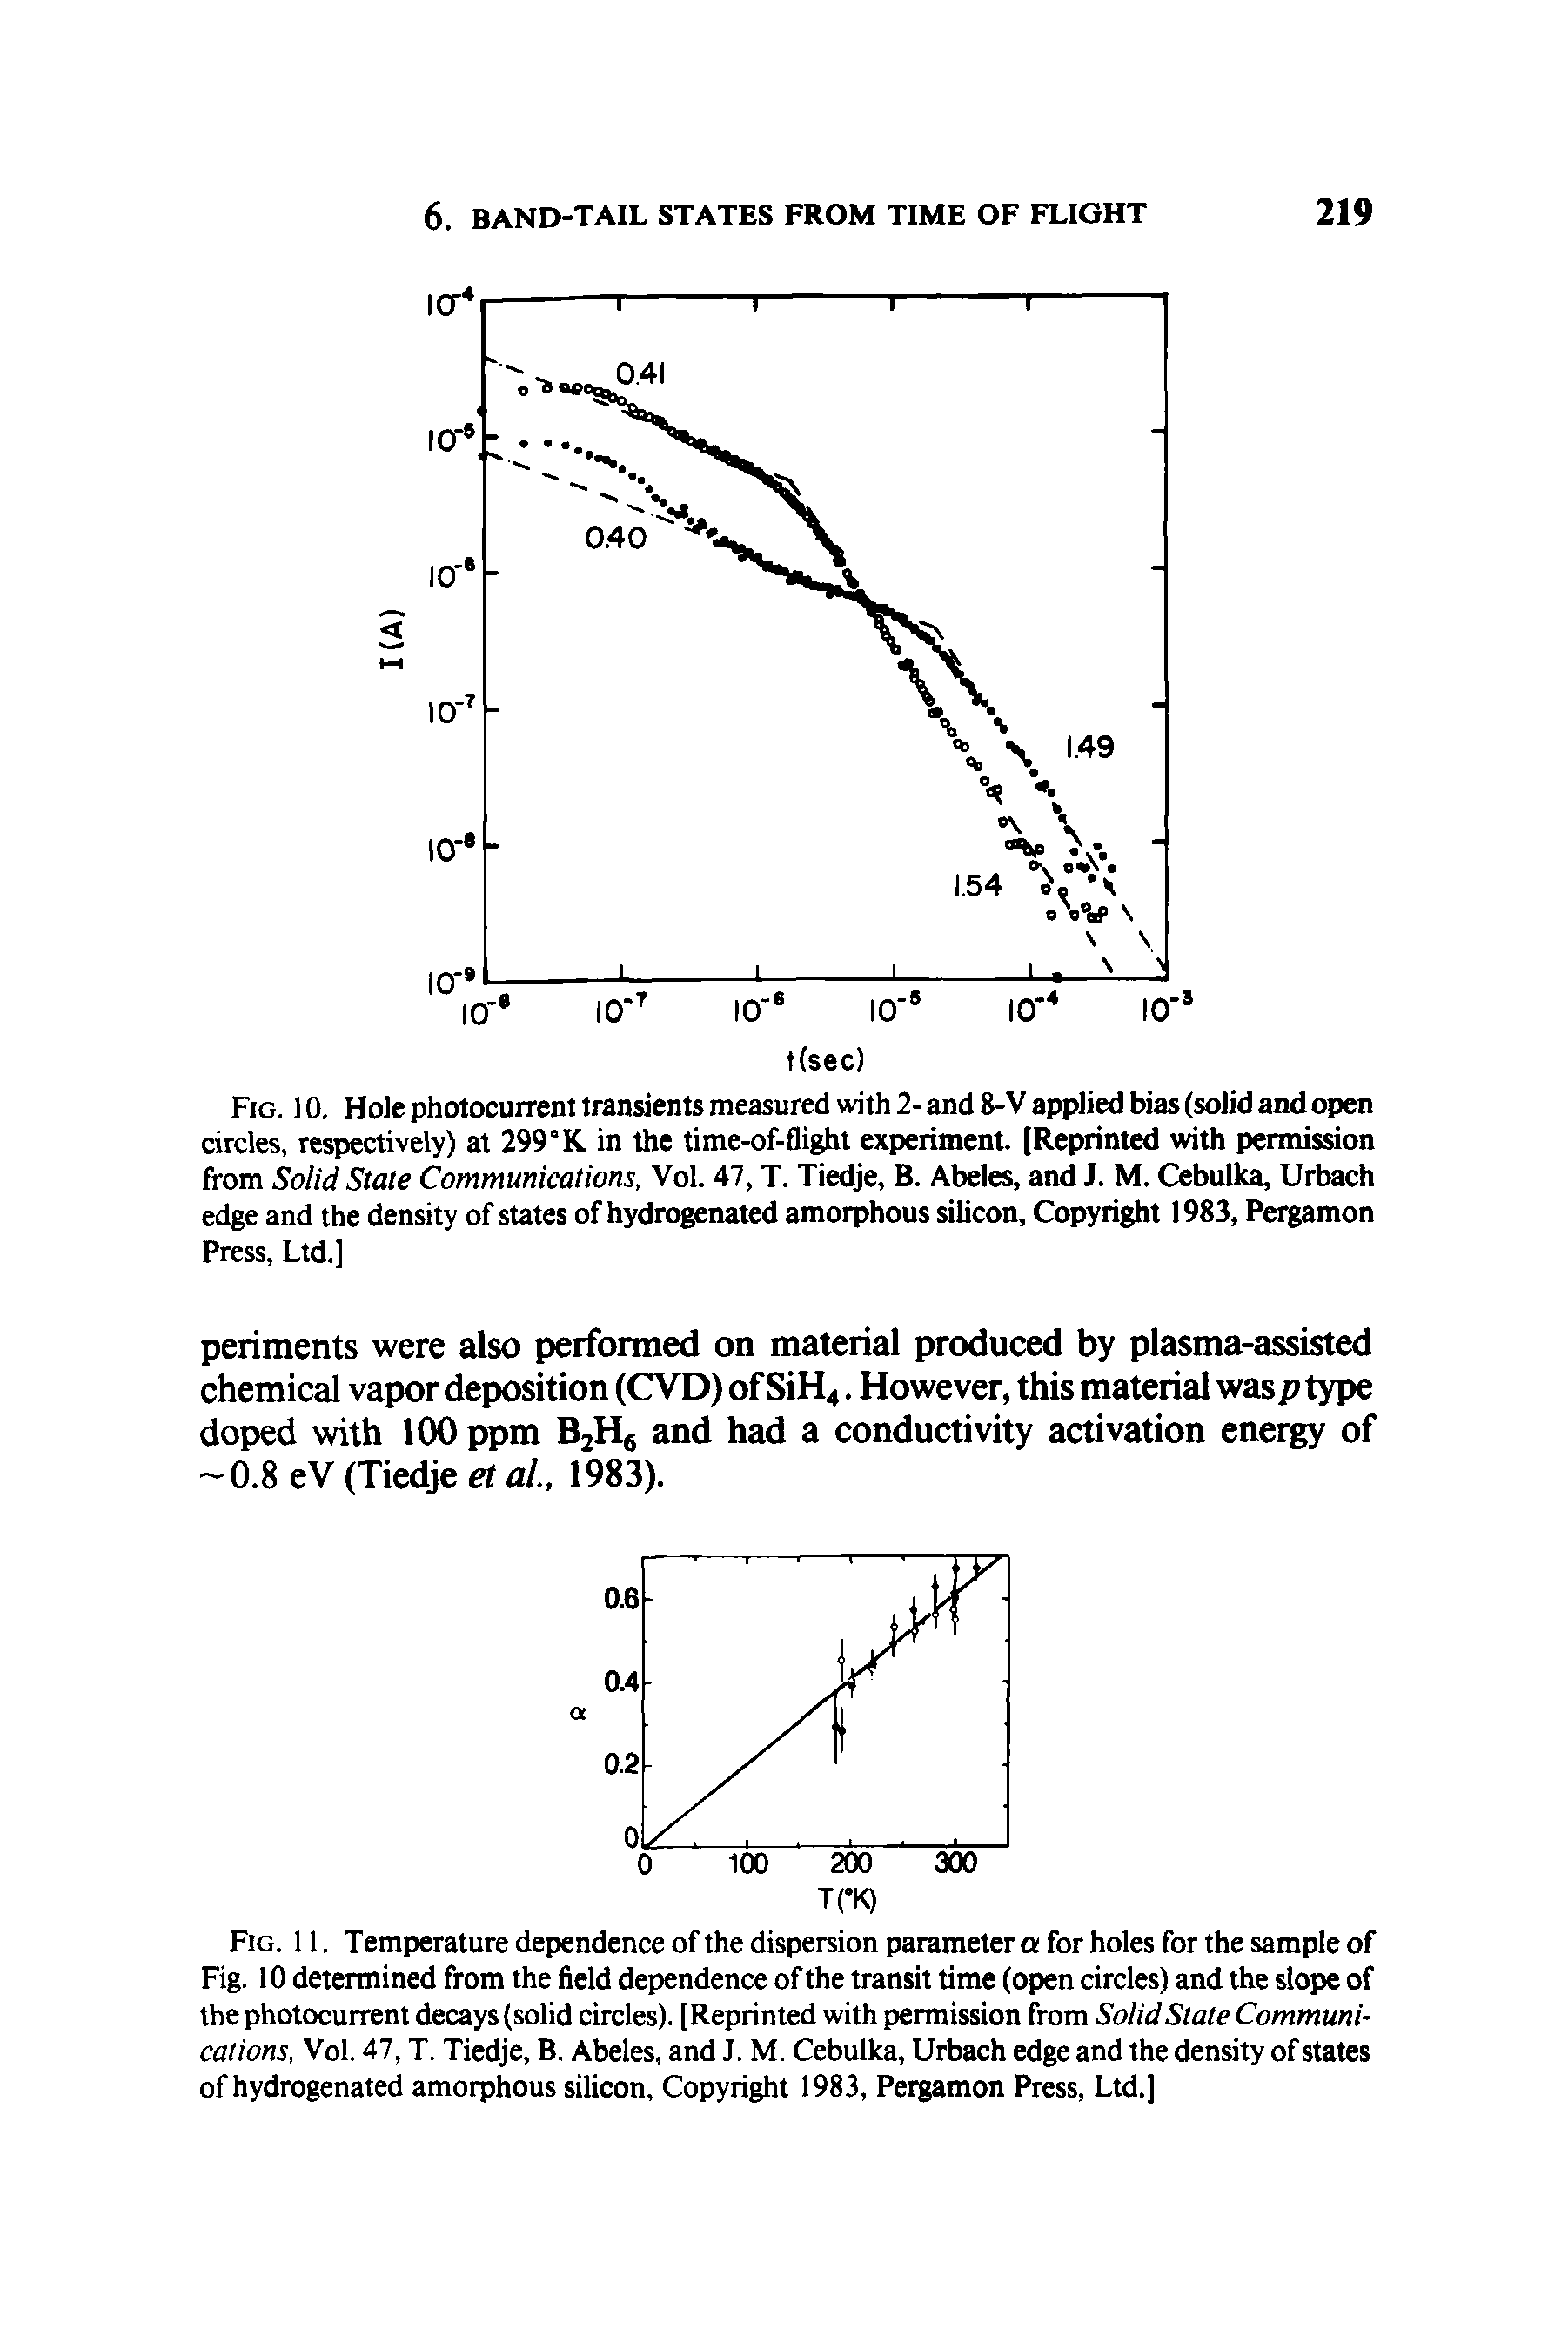 Fig. 11, Temperature dependence of the dispersion parameter o for holes for the sample of Fig. 10 determined from the field dependence of the transit time (open circles) and the slope of the photocurrent decays (solid circles). [Reprinted with permission from Solid State Communications, Vol. 47, T. Tiedje, B. Abeles, and J. M. Cebulka, Urbach edge and the density of states of hydrogenated amorphous silicon. Copyright 1983, Pergamon Press, Ltd.)...